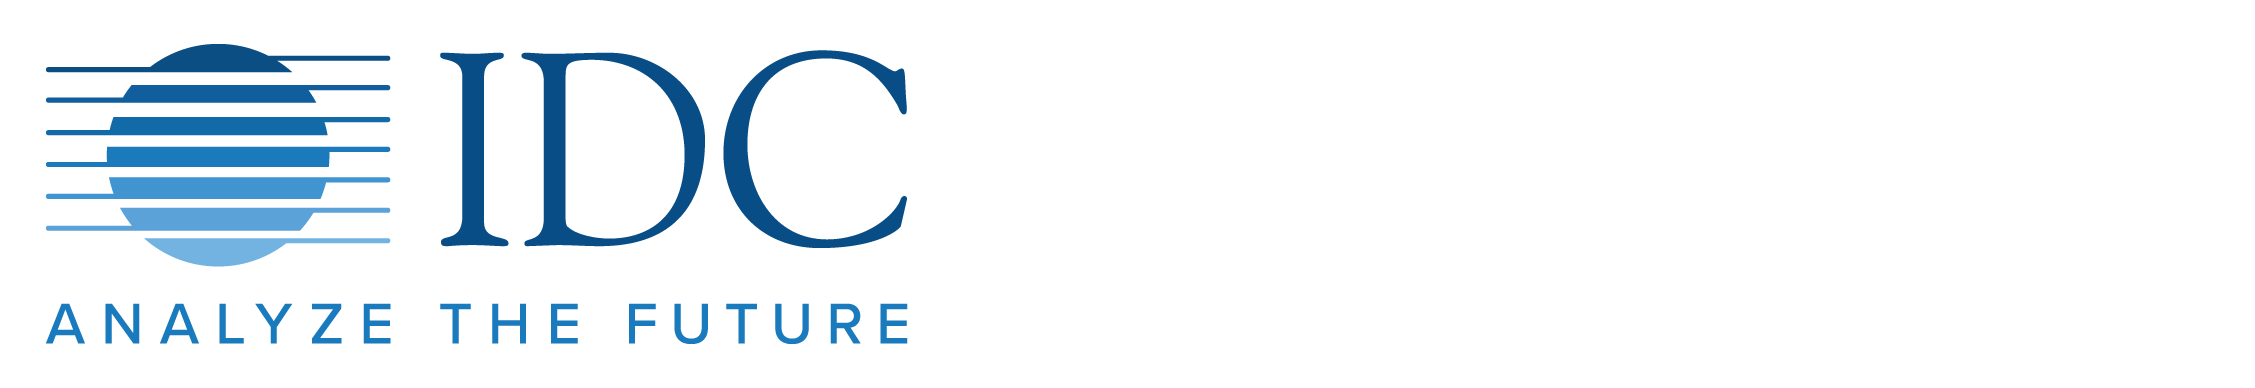 IDC logo with space to the right